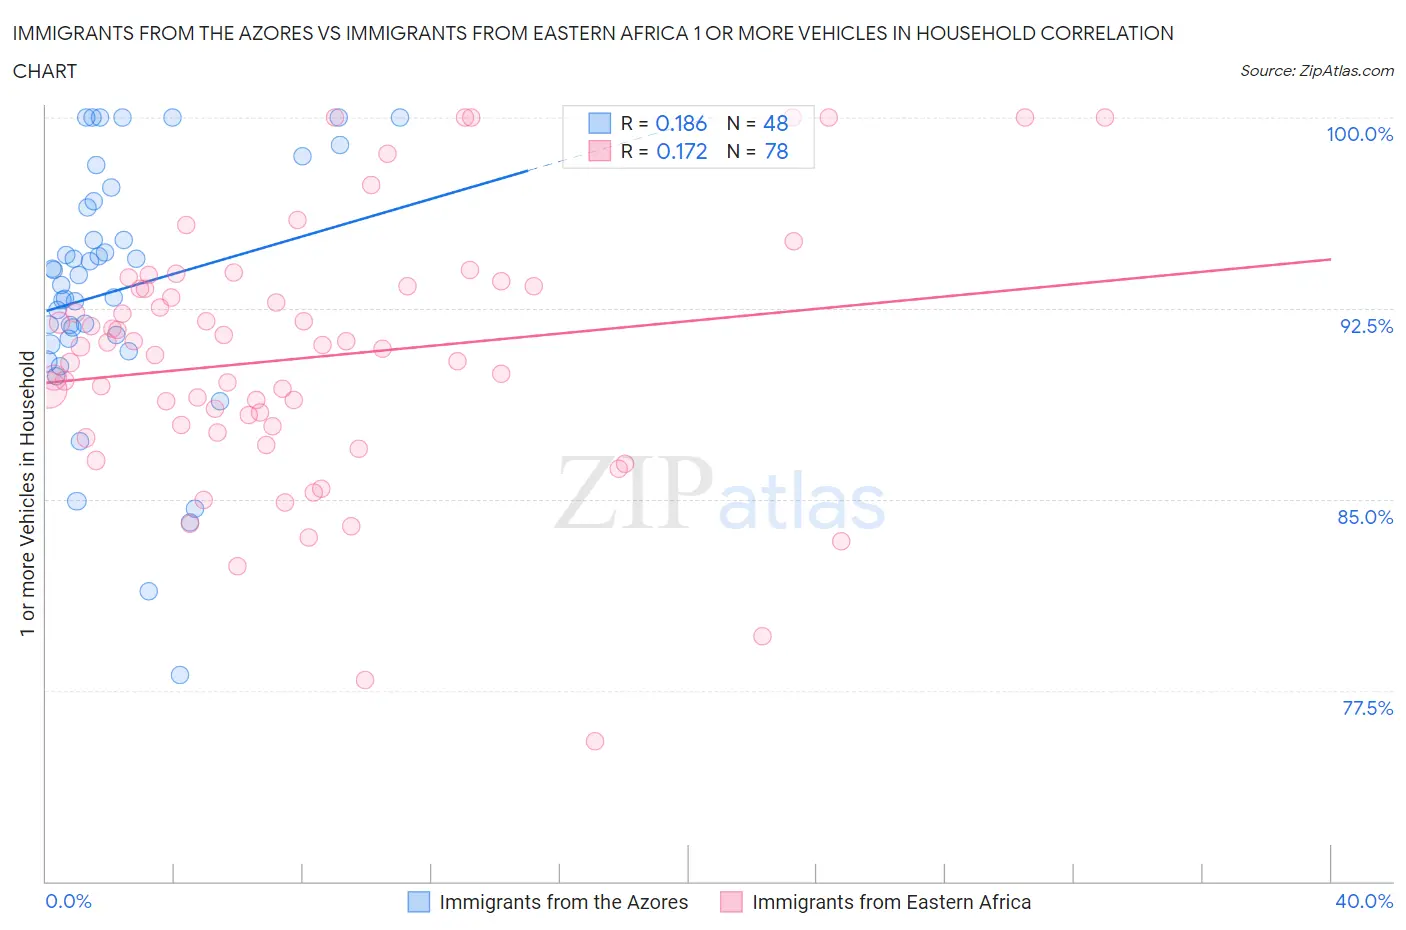 Immigrants from the Azores vs Immigrants from Eastern Africa 1 or more Vehicles in Household